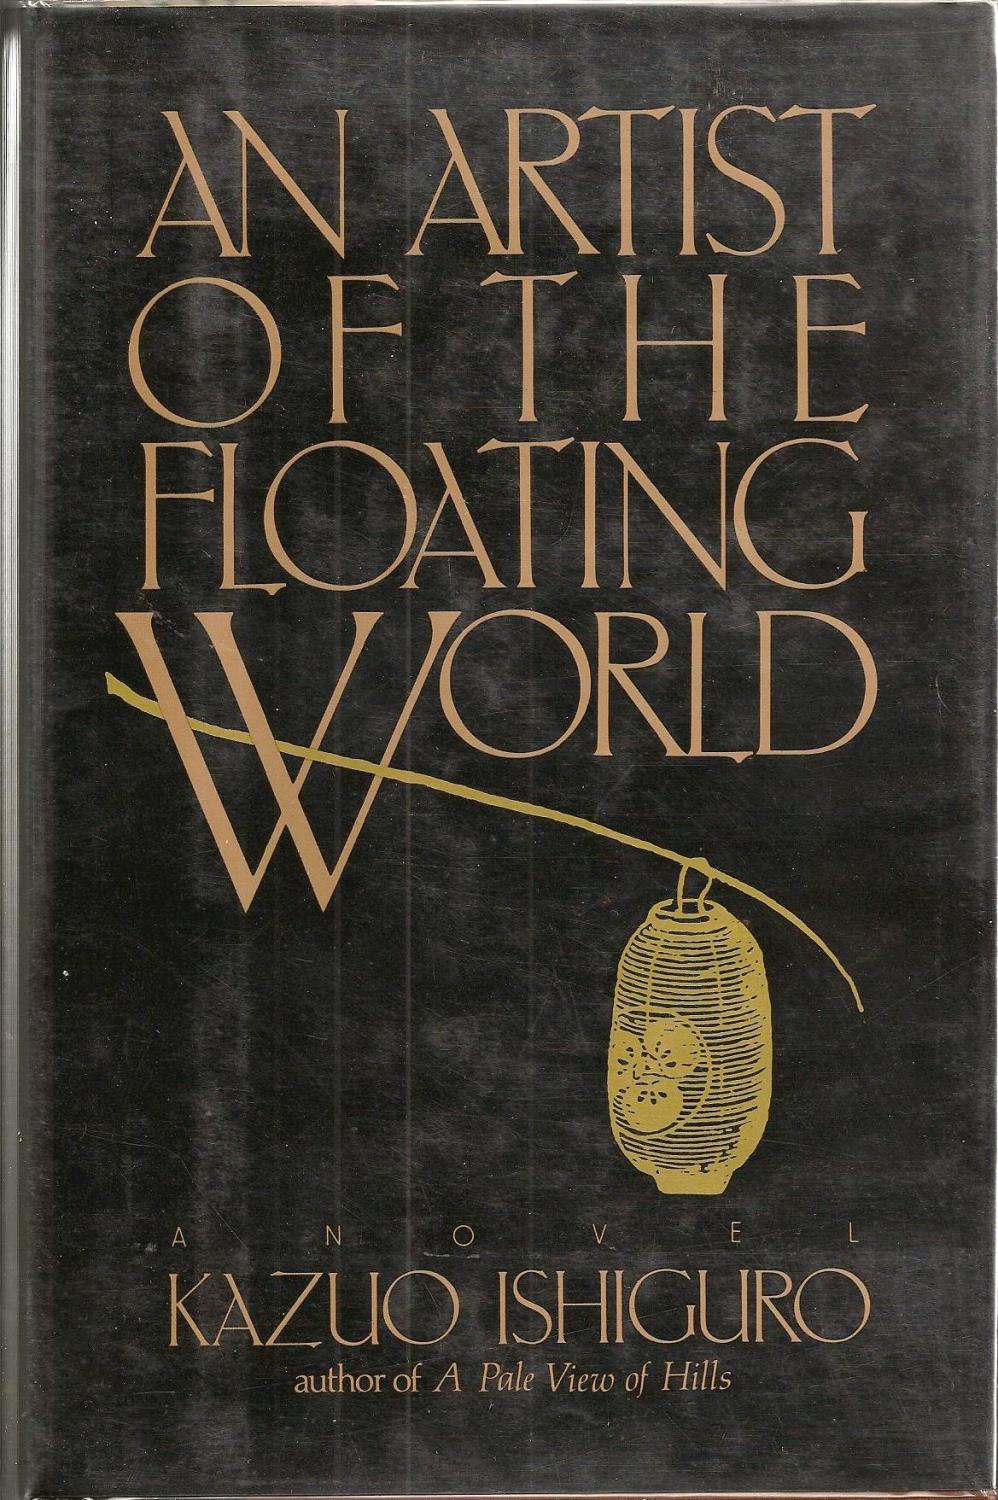 img - An Artist of the Floating World by Kazuo Ishiguro (1986)